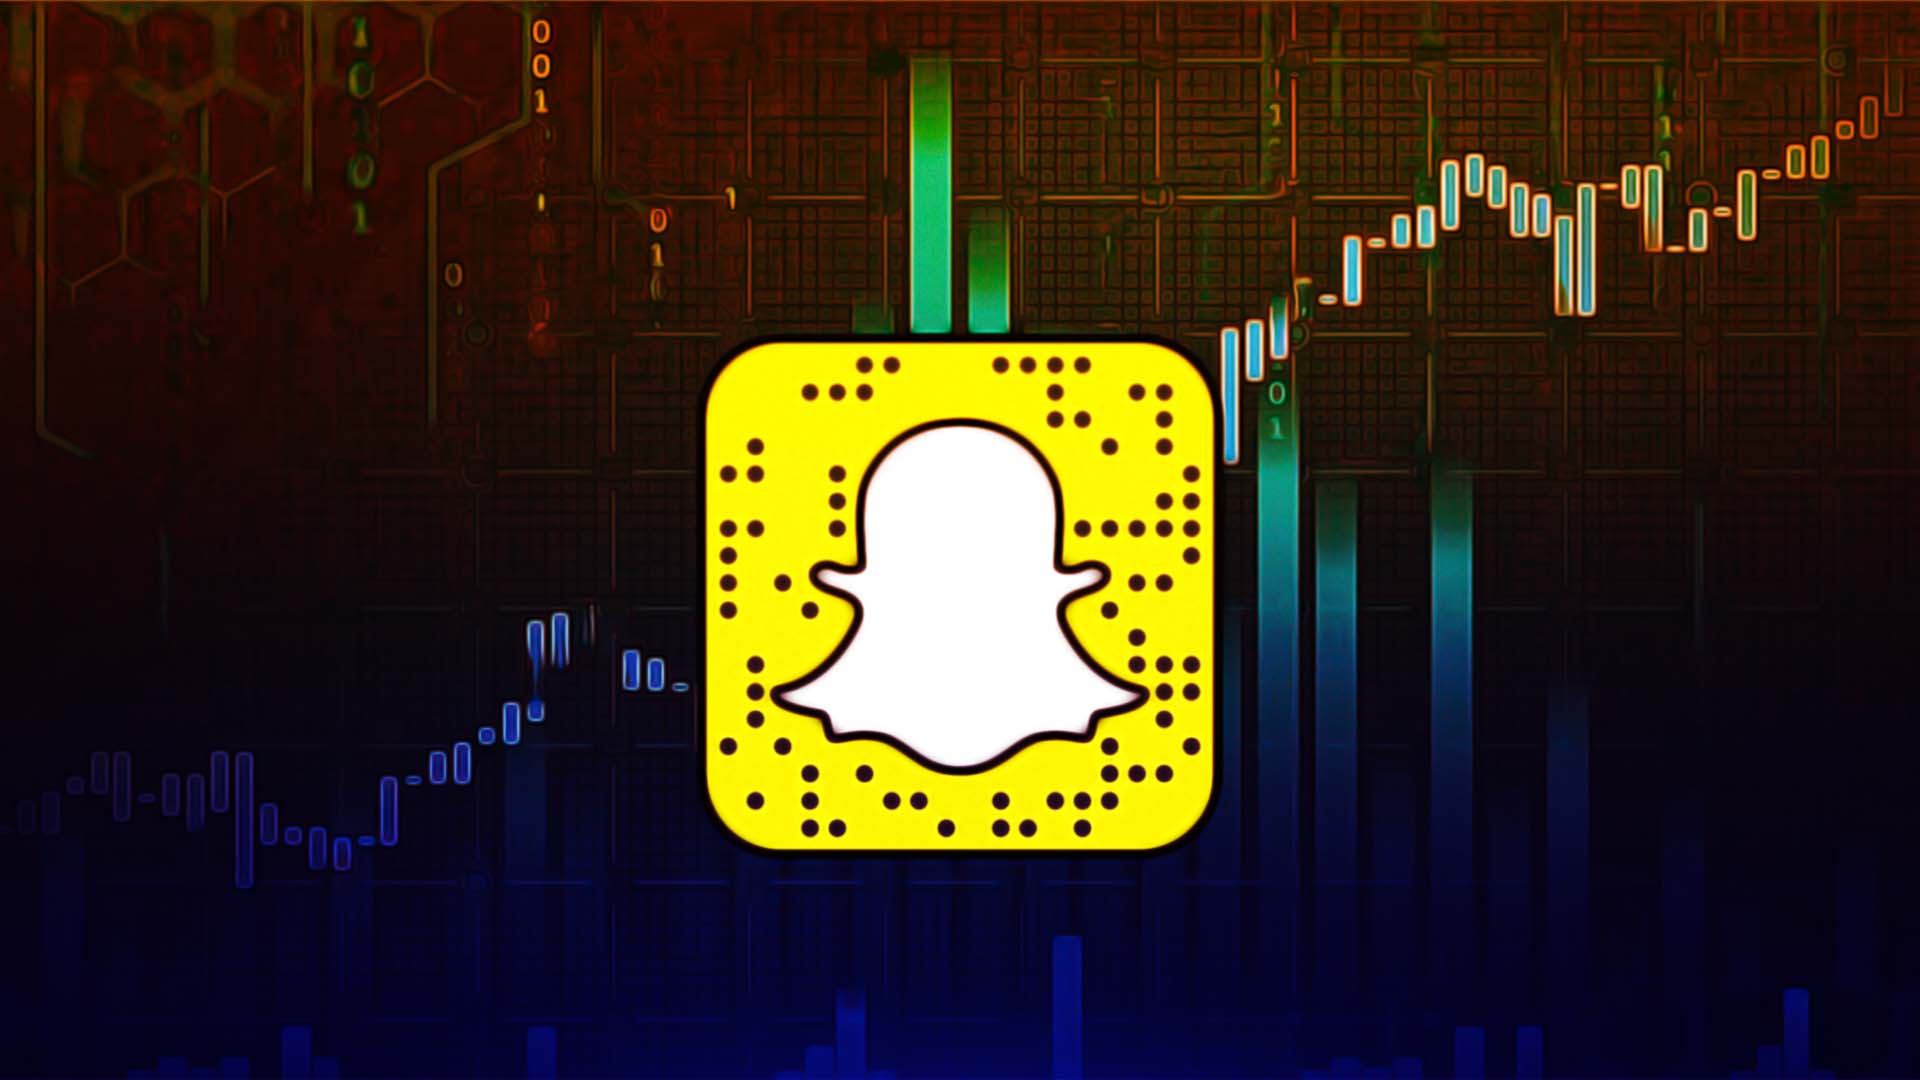 Snap Inc. Stock Price Prediction 2023: Will This Consolidation Phase Lead SNAP Stock towards $40 Pricing?